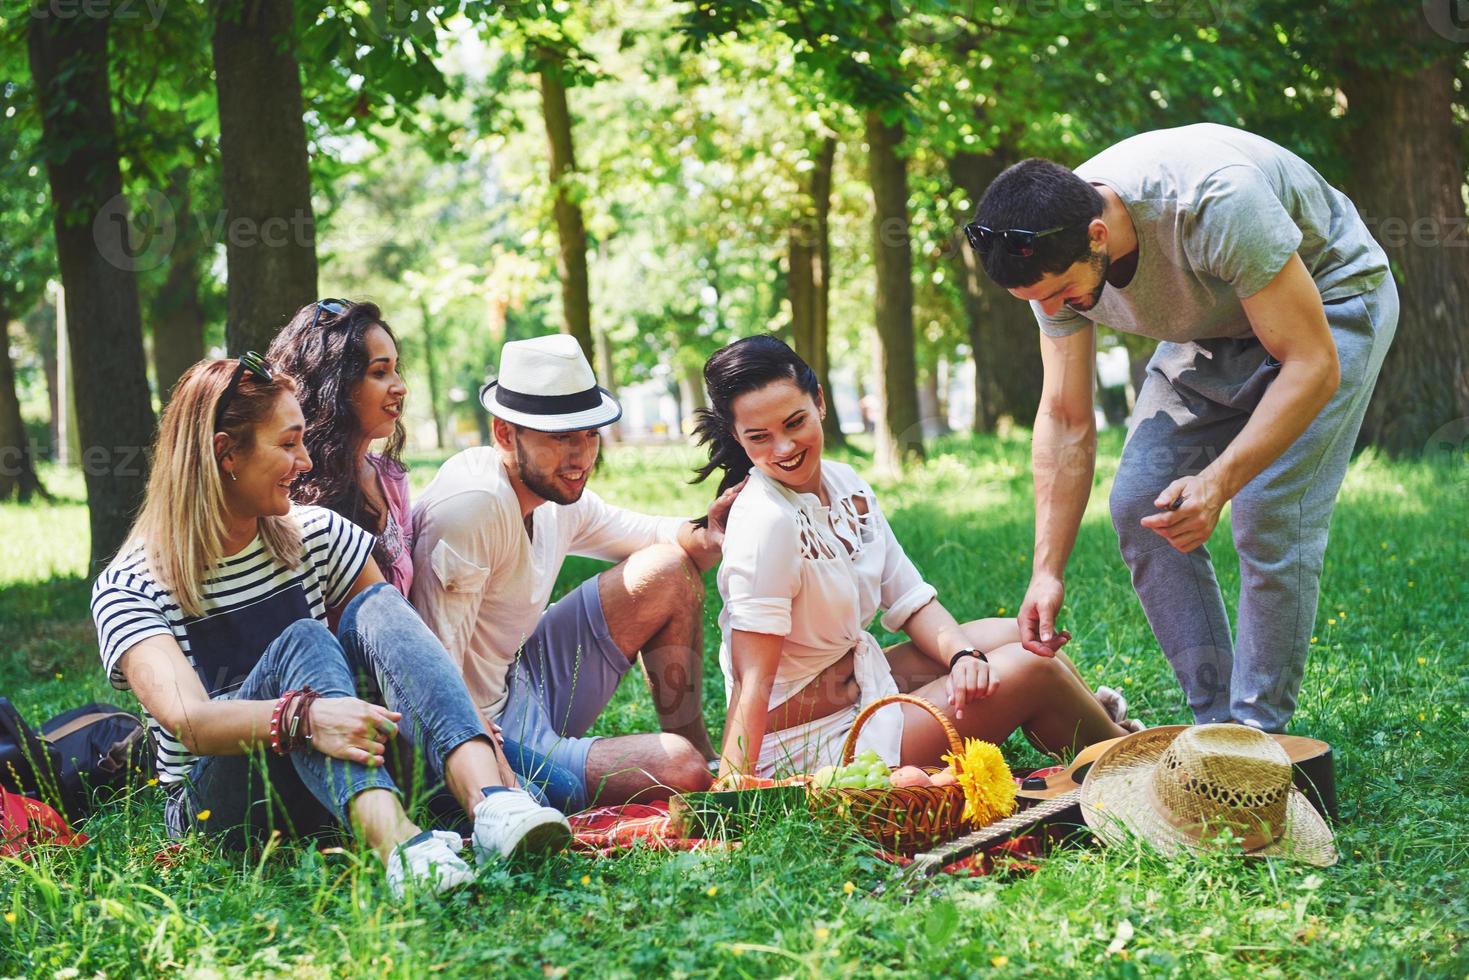 Group of friends having pic-nic in a park on a sunny day - People hanging out, having fun while grilling and relaxing photo